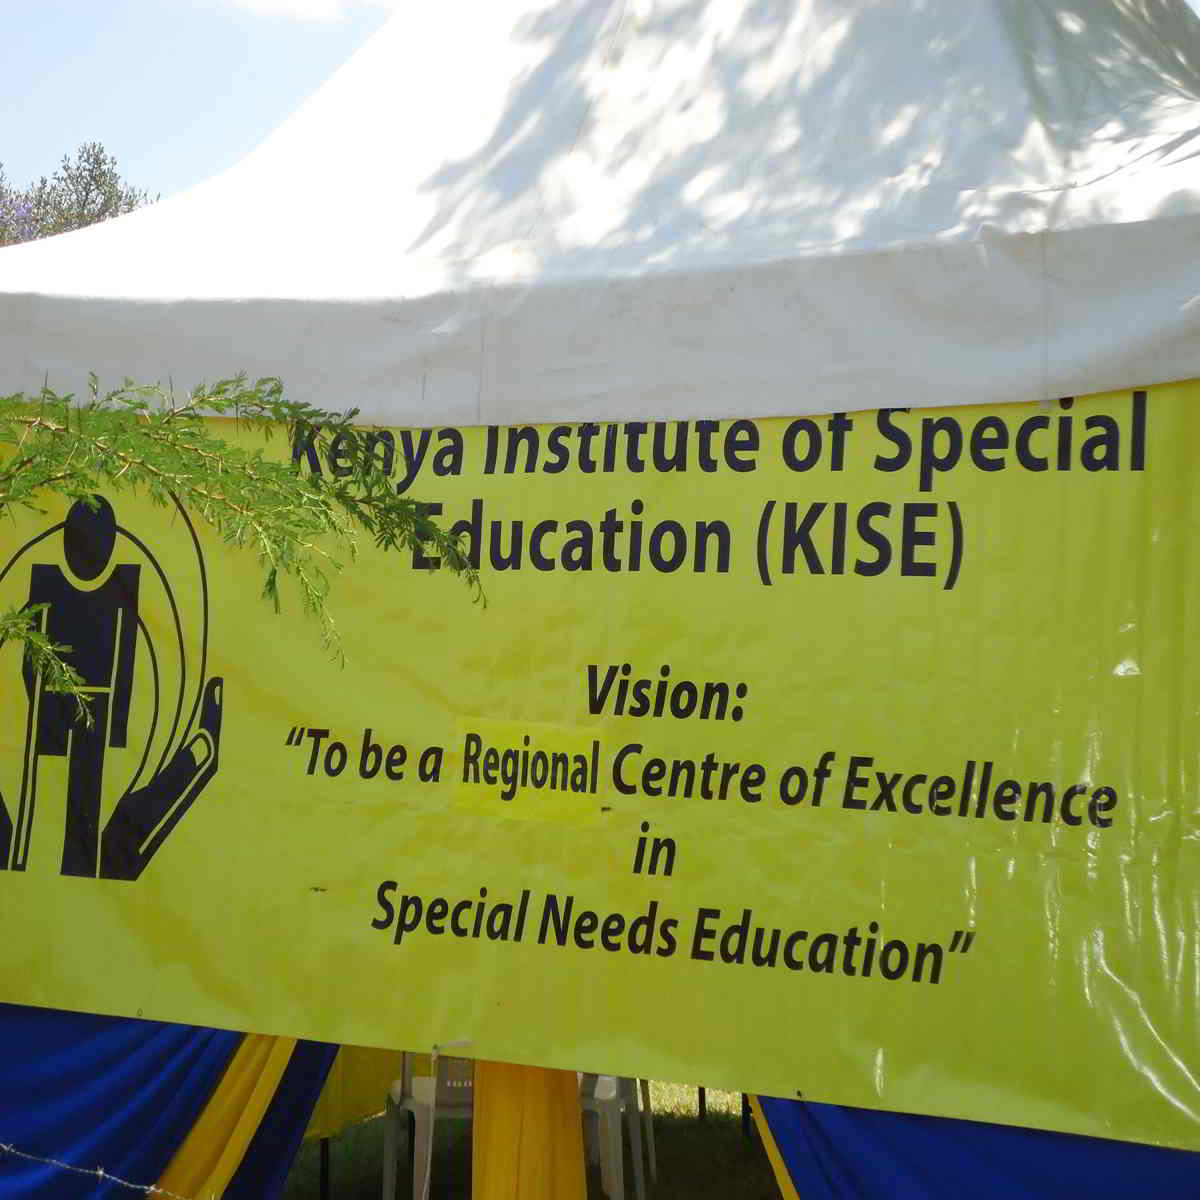 Colleges offering diploma in special needs education in Kenya